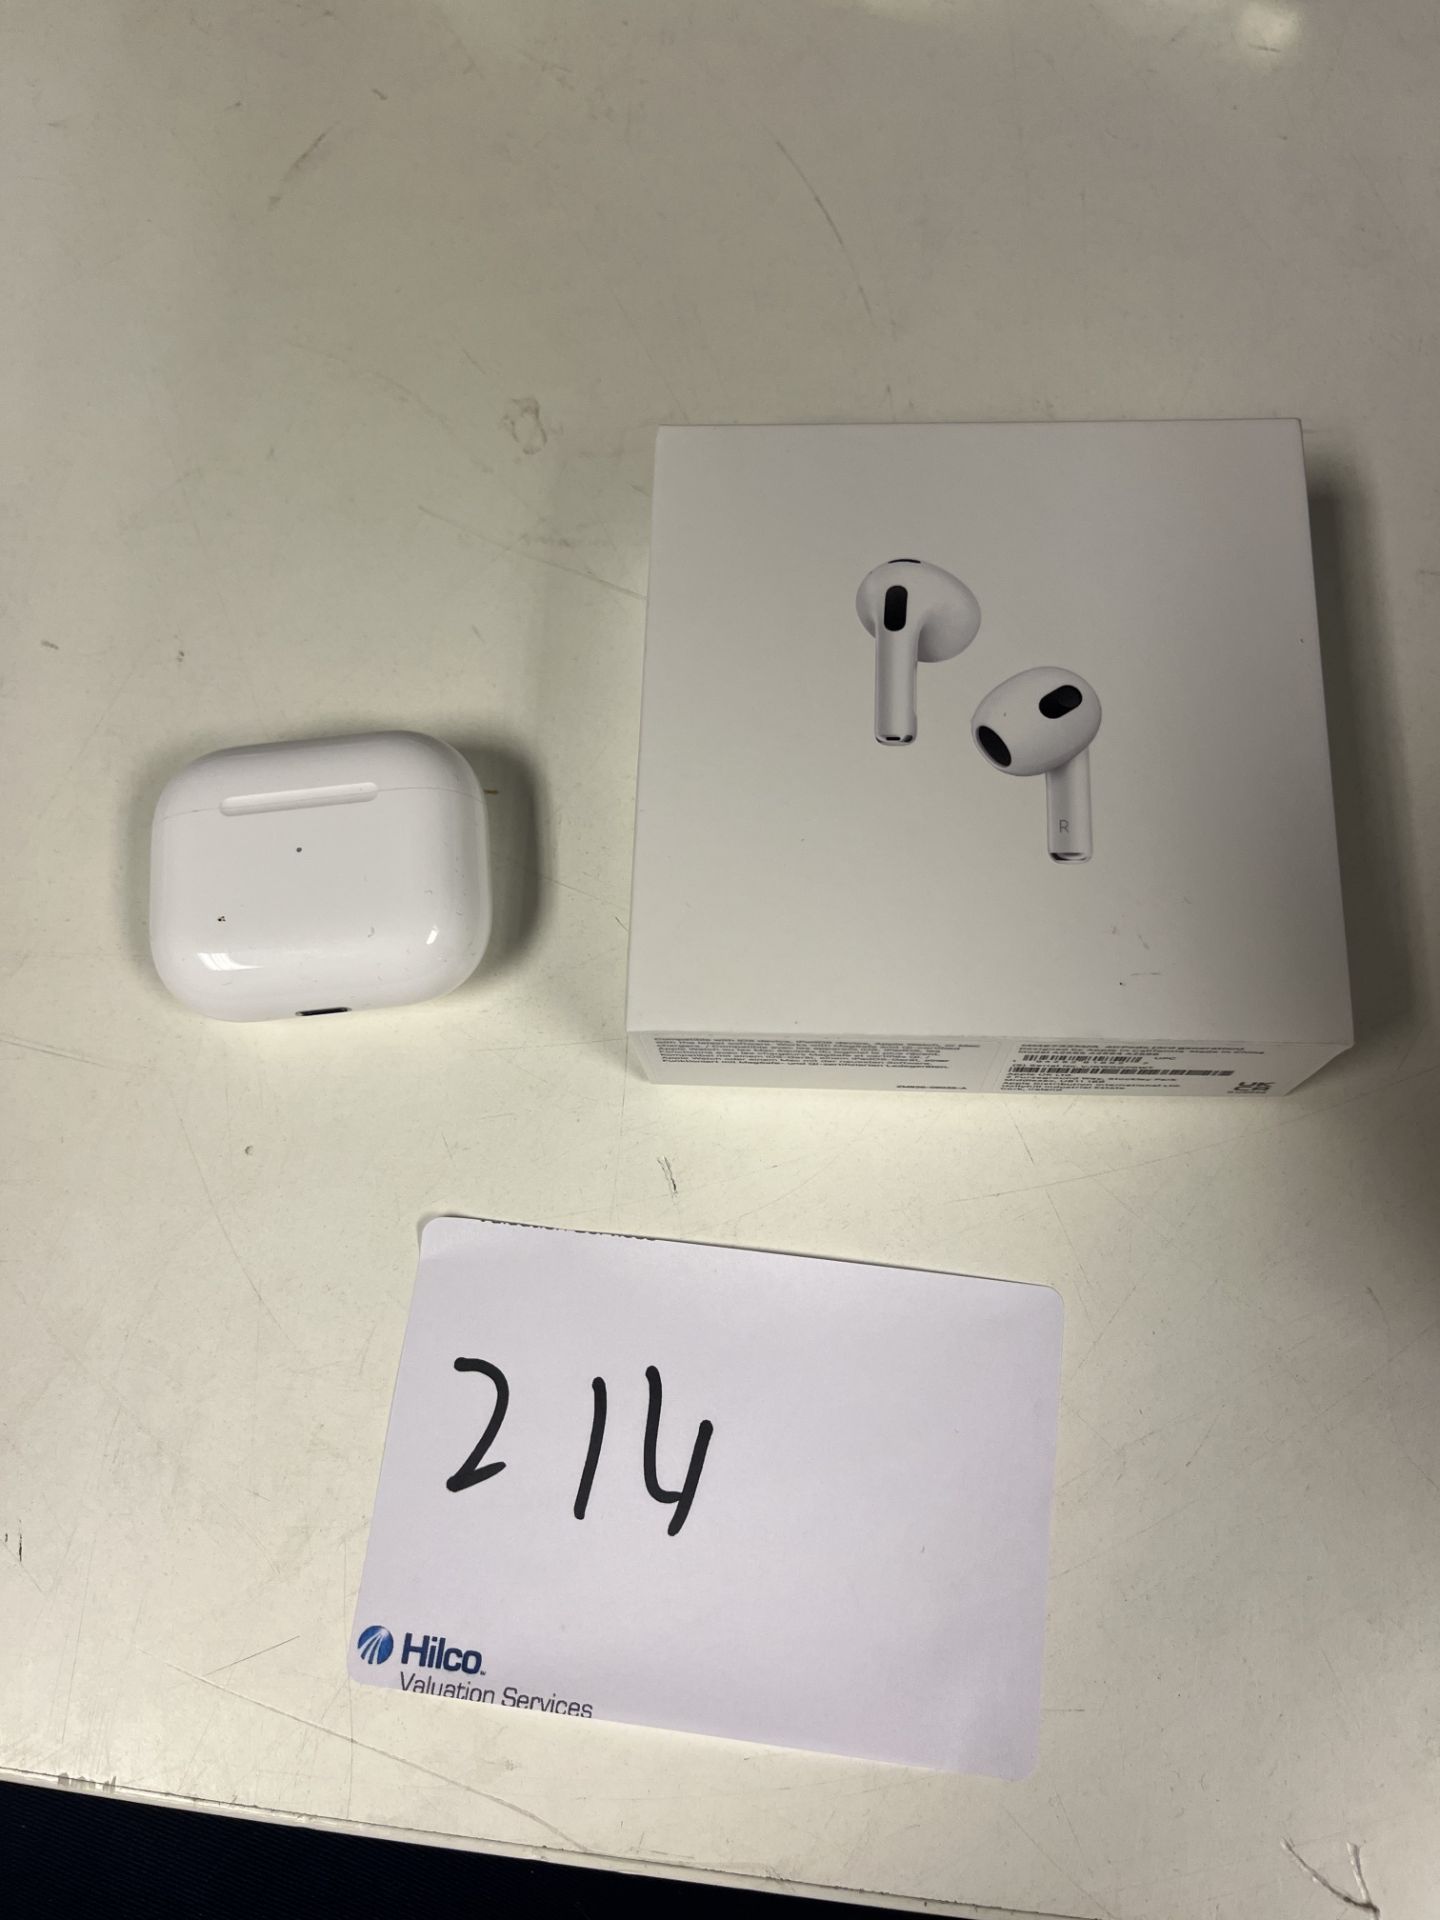 Apple AirPod with MagSafe Charging Case With box. Serial No.VJKWGGPOWT